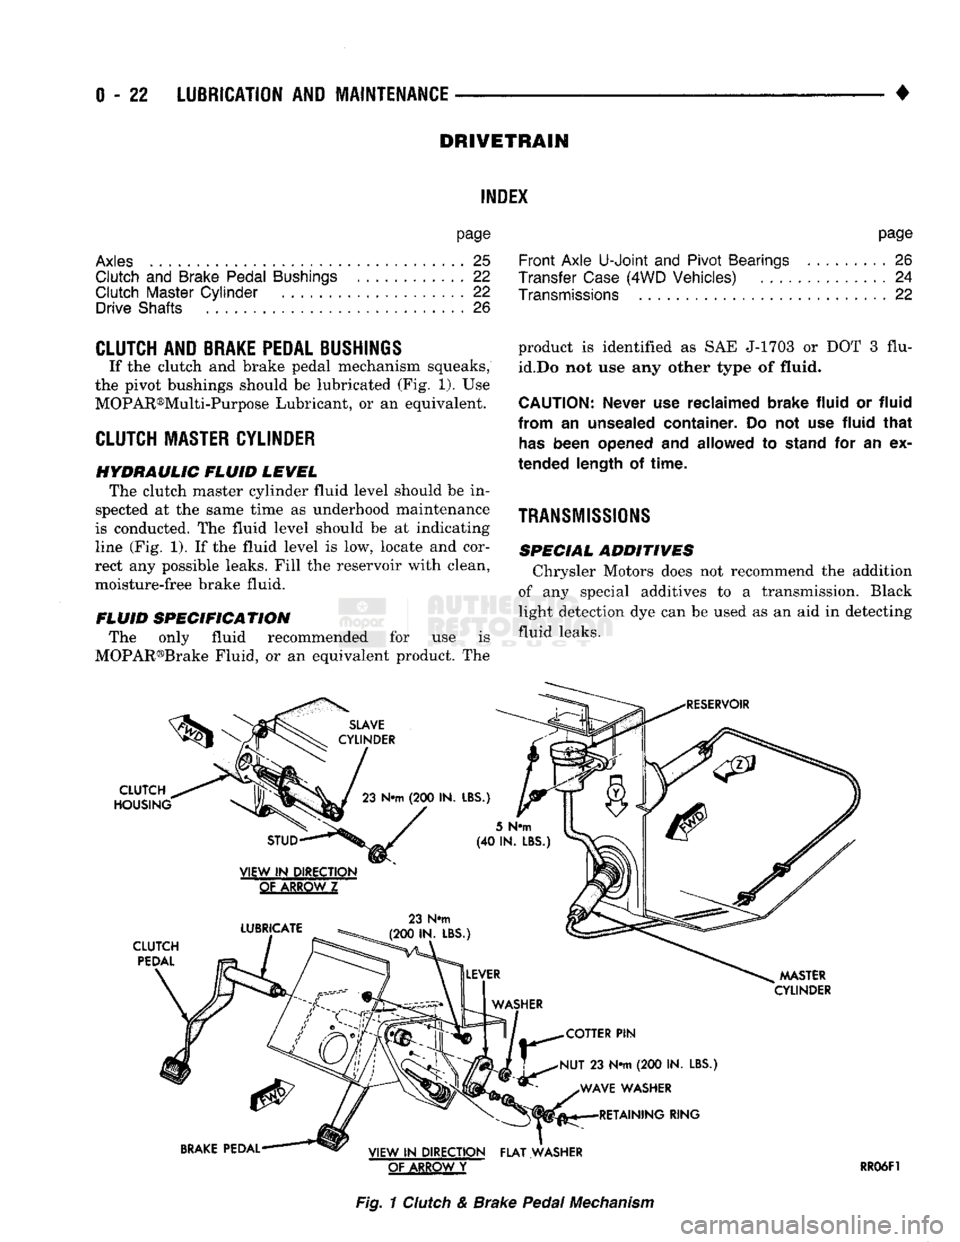 DODGE TRUCK 1993  Service Repair Manual 
0
 - 22
 LUBRICATION
 AND
 MAINTENANCE 

DRIVETRAIN 

INDEX 

page 

Axles
 25 
 Clutch
 and
 Brake Pedal
 Bushings
 ............ 22 

Clutch Master Cylinder
 22 

Drive Shafts
 26 
 page 

Front Axl